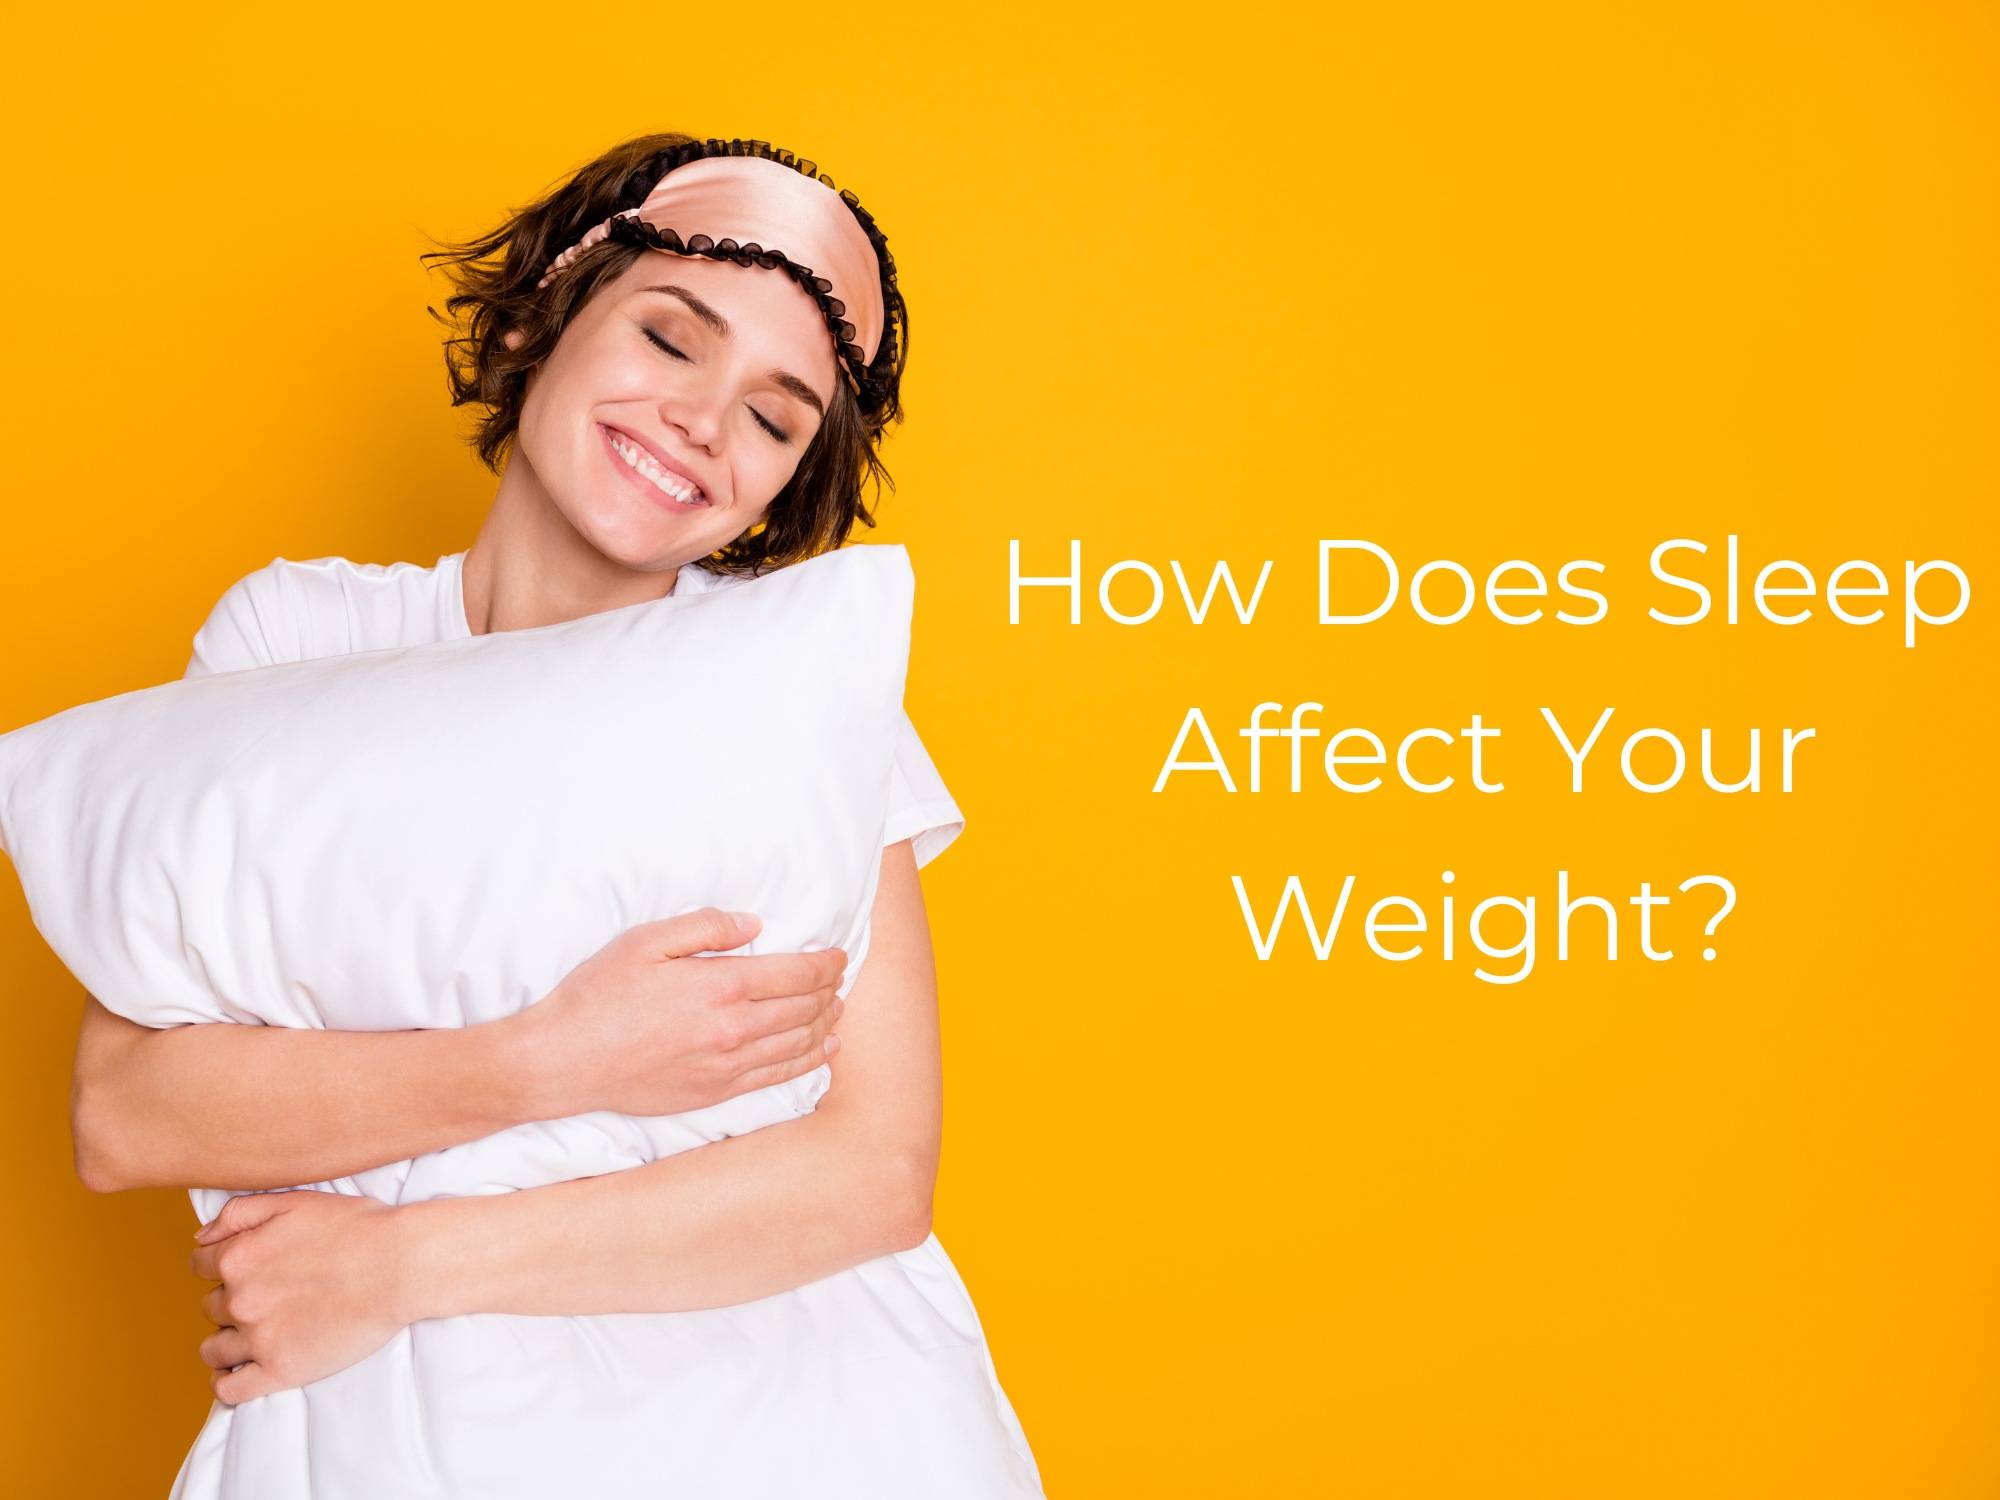 how does sleep affect your weight?